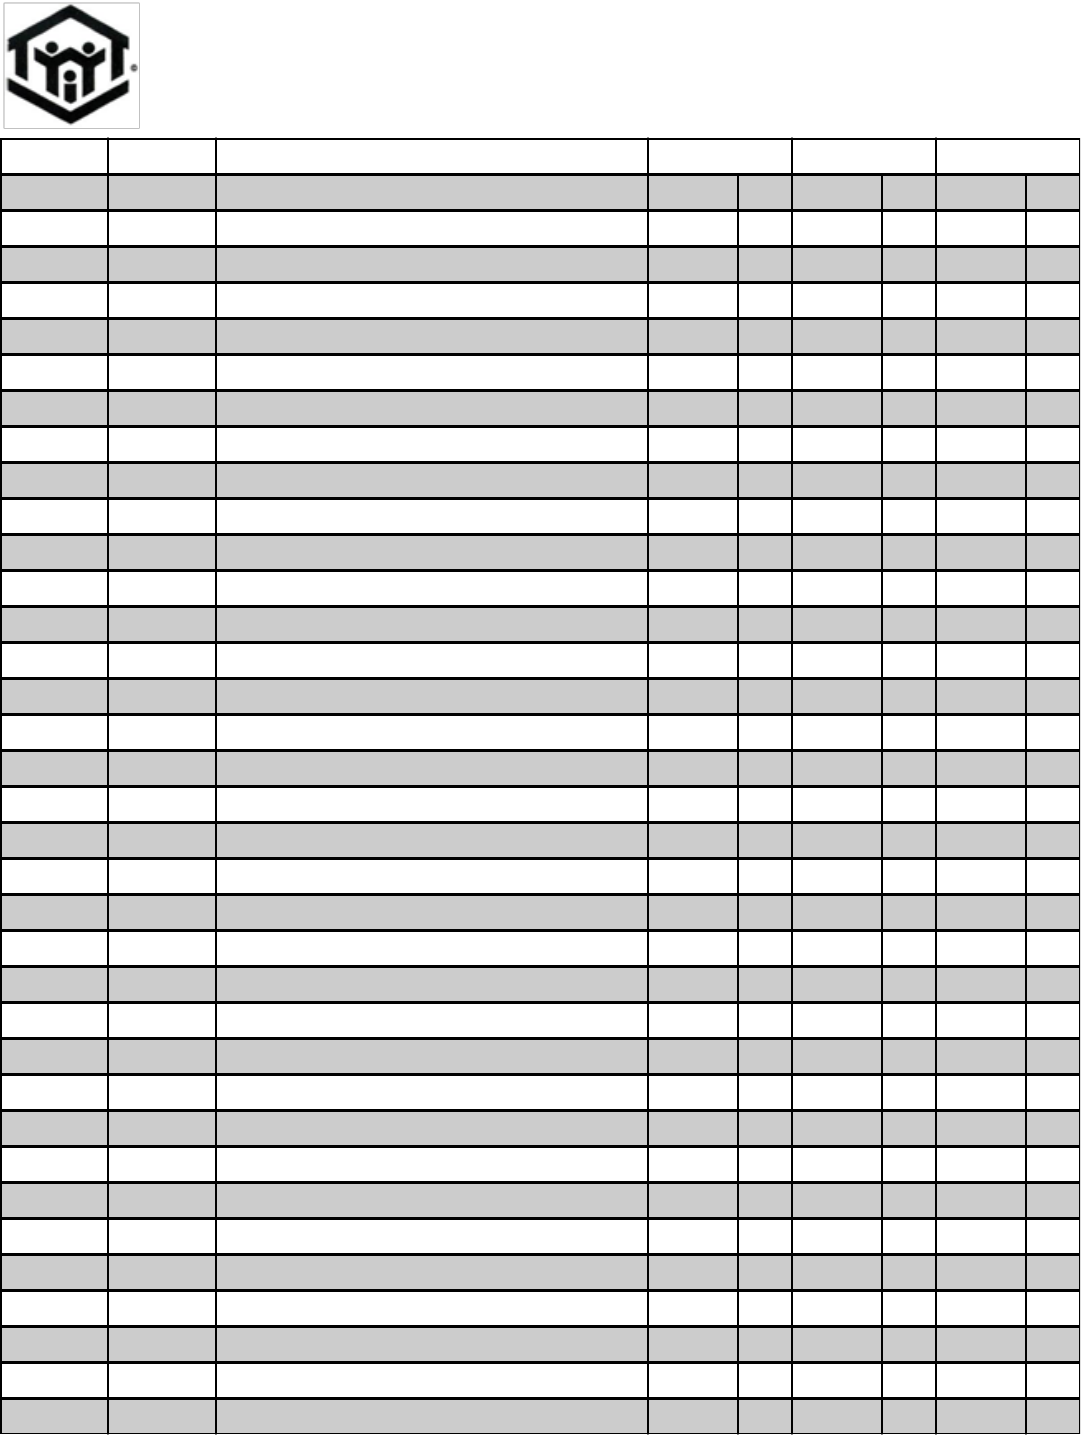 blank-check-register-template-excel-templates